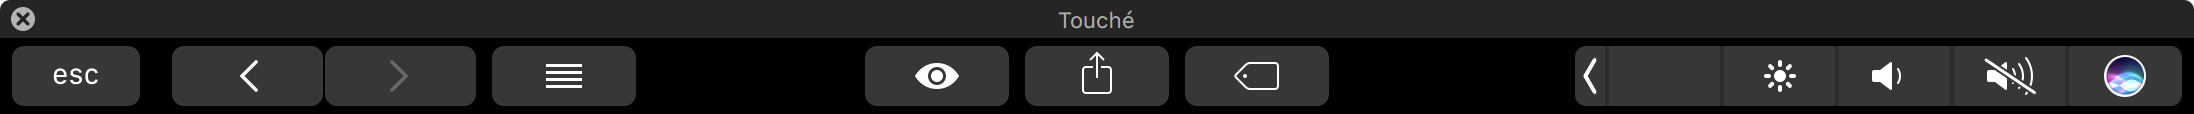 Thumbnail image of Touché's Touch Bar